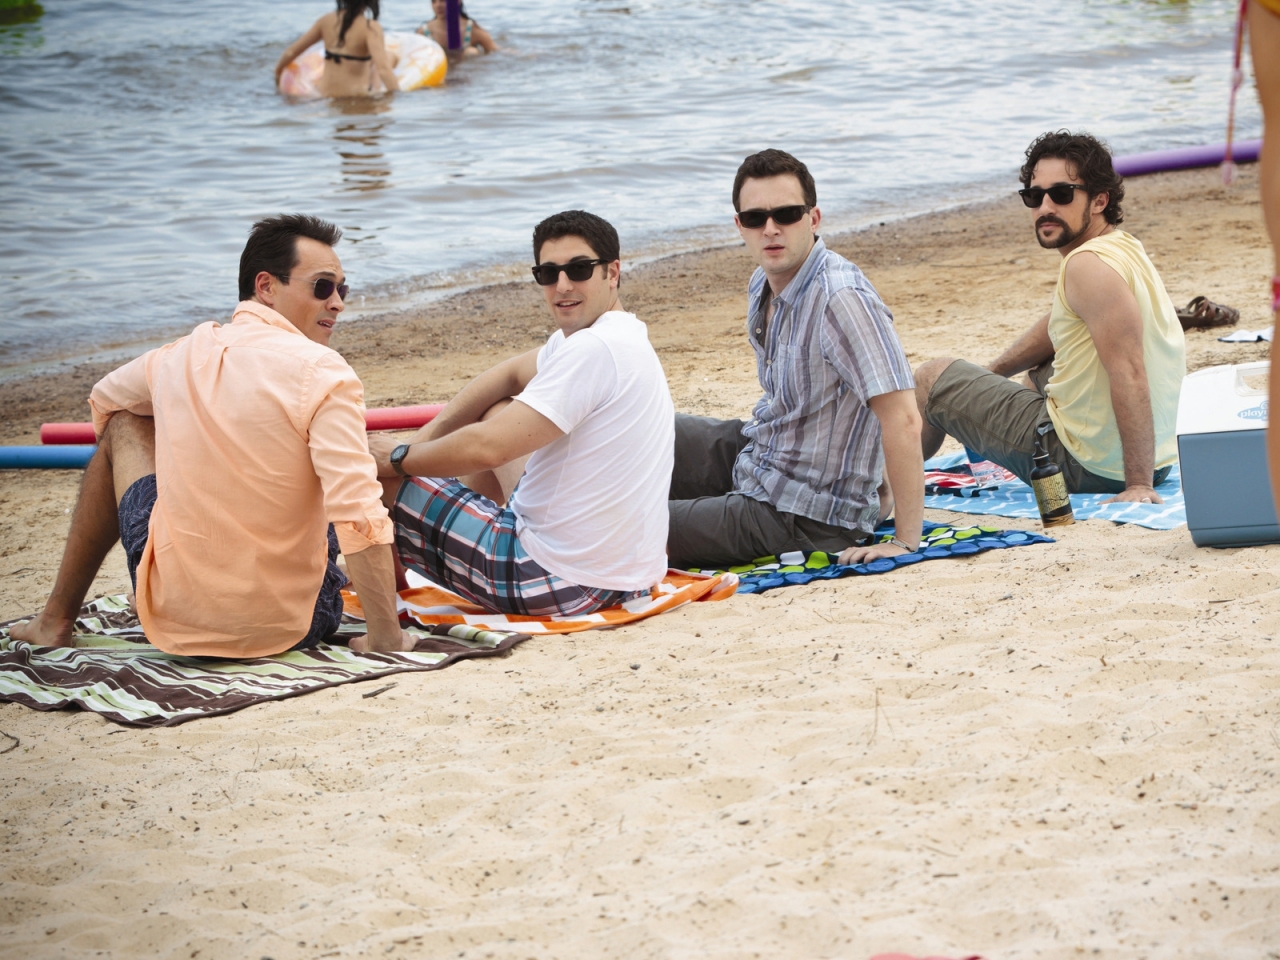 American Reunion Movie for 1280 x 960 resolution